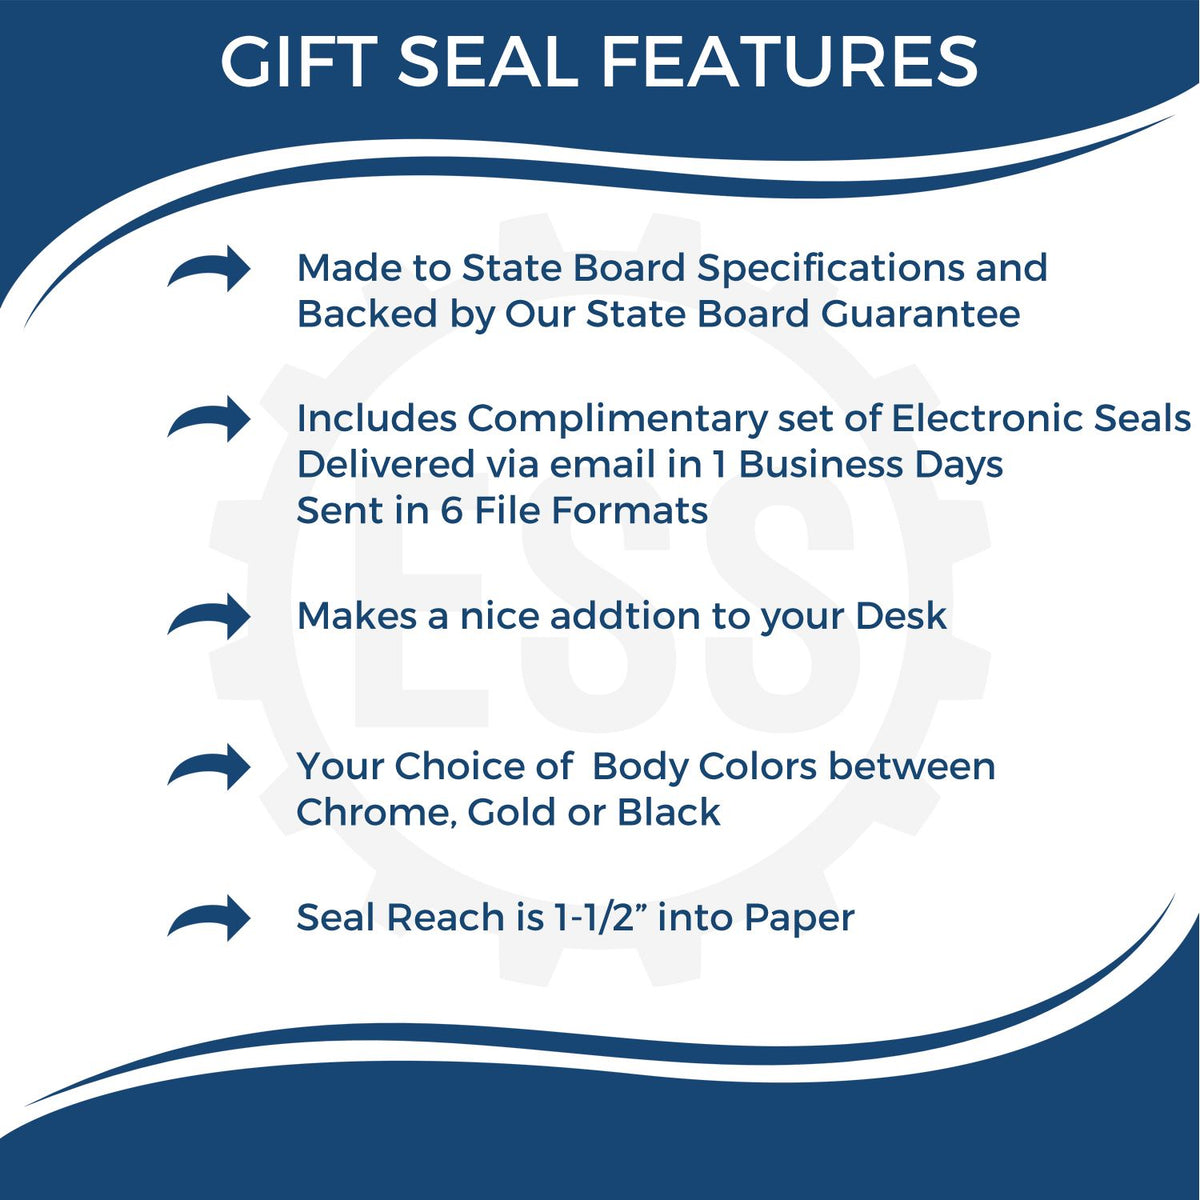 A picture of an infographic highlighting the selling points for the Gift Florida Architect Seal